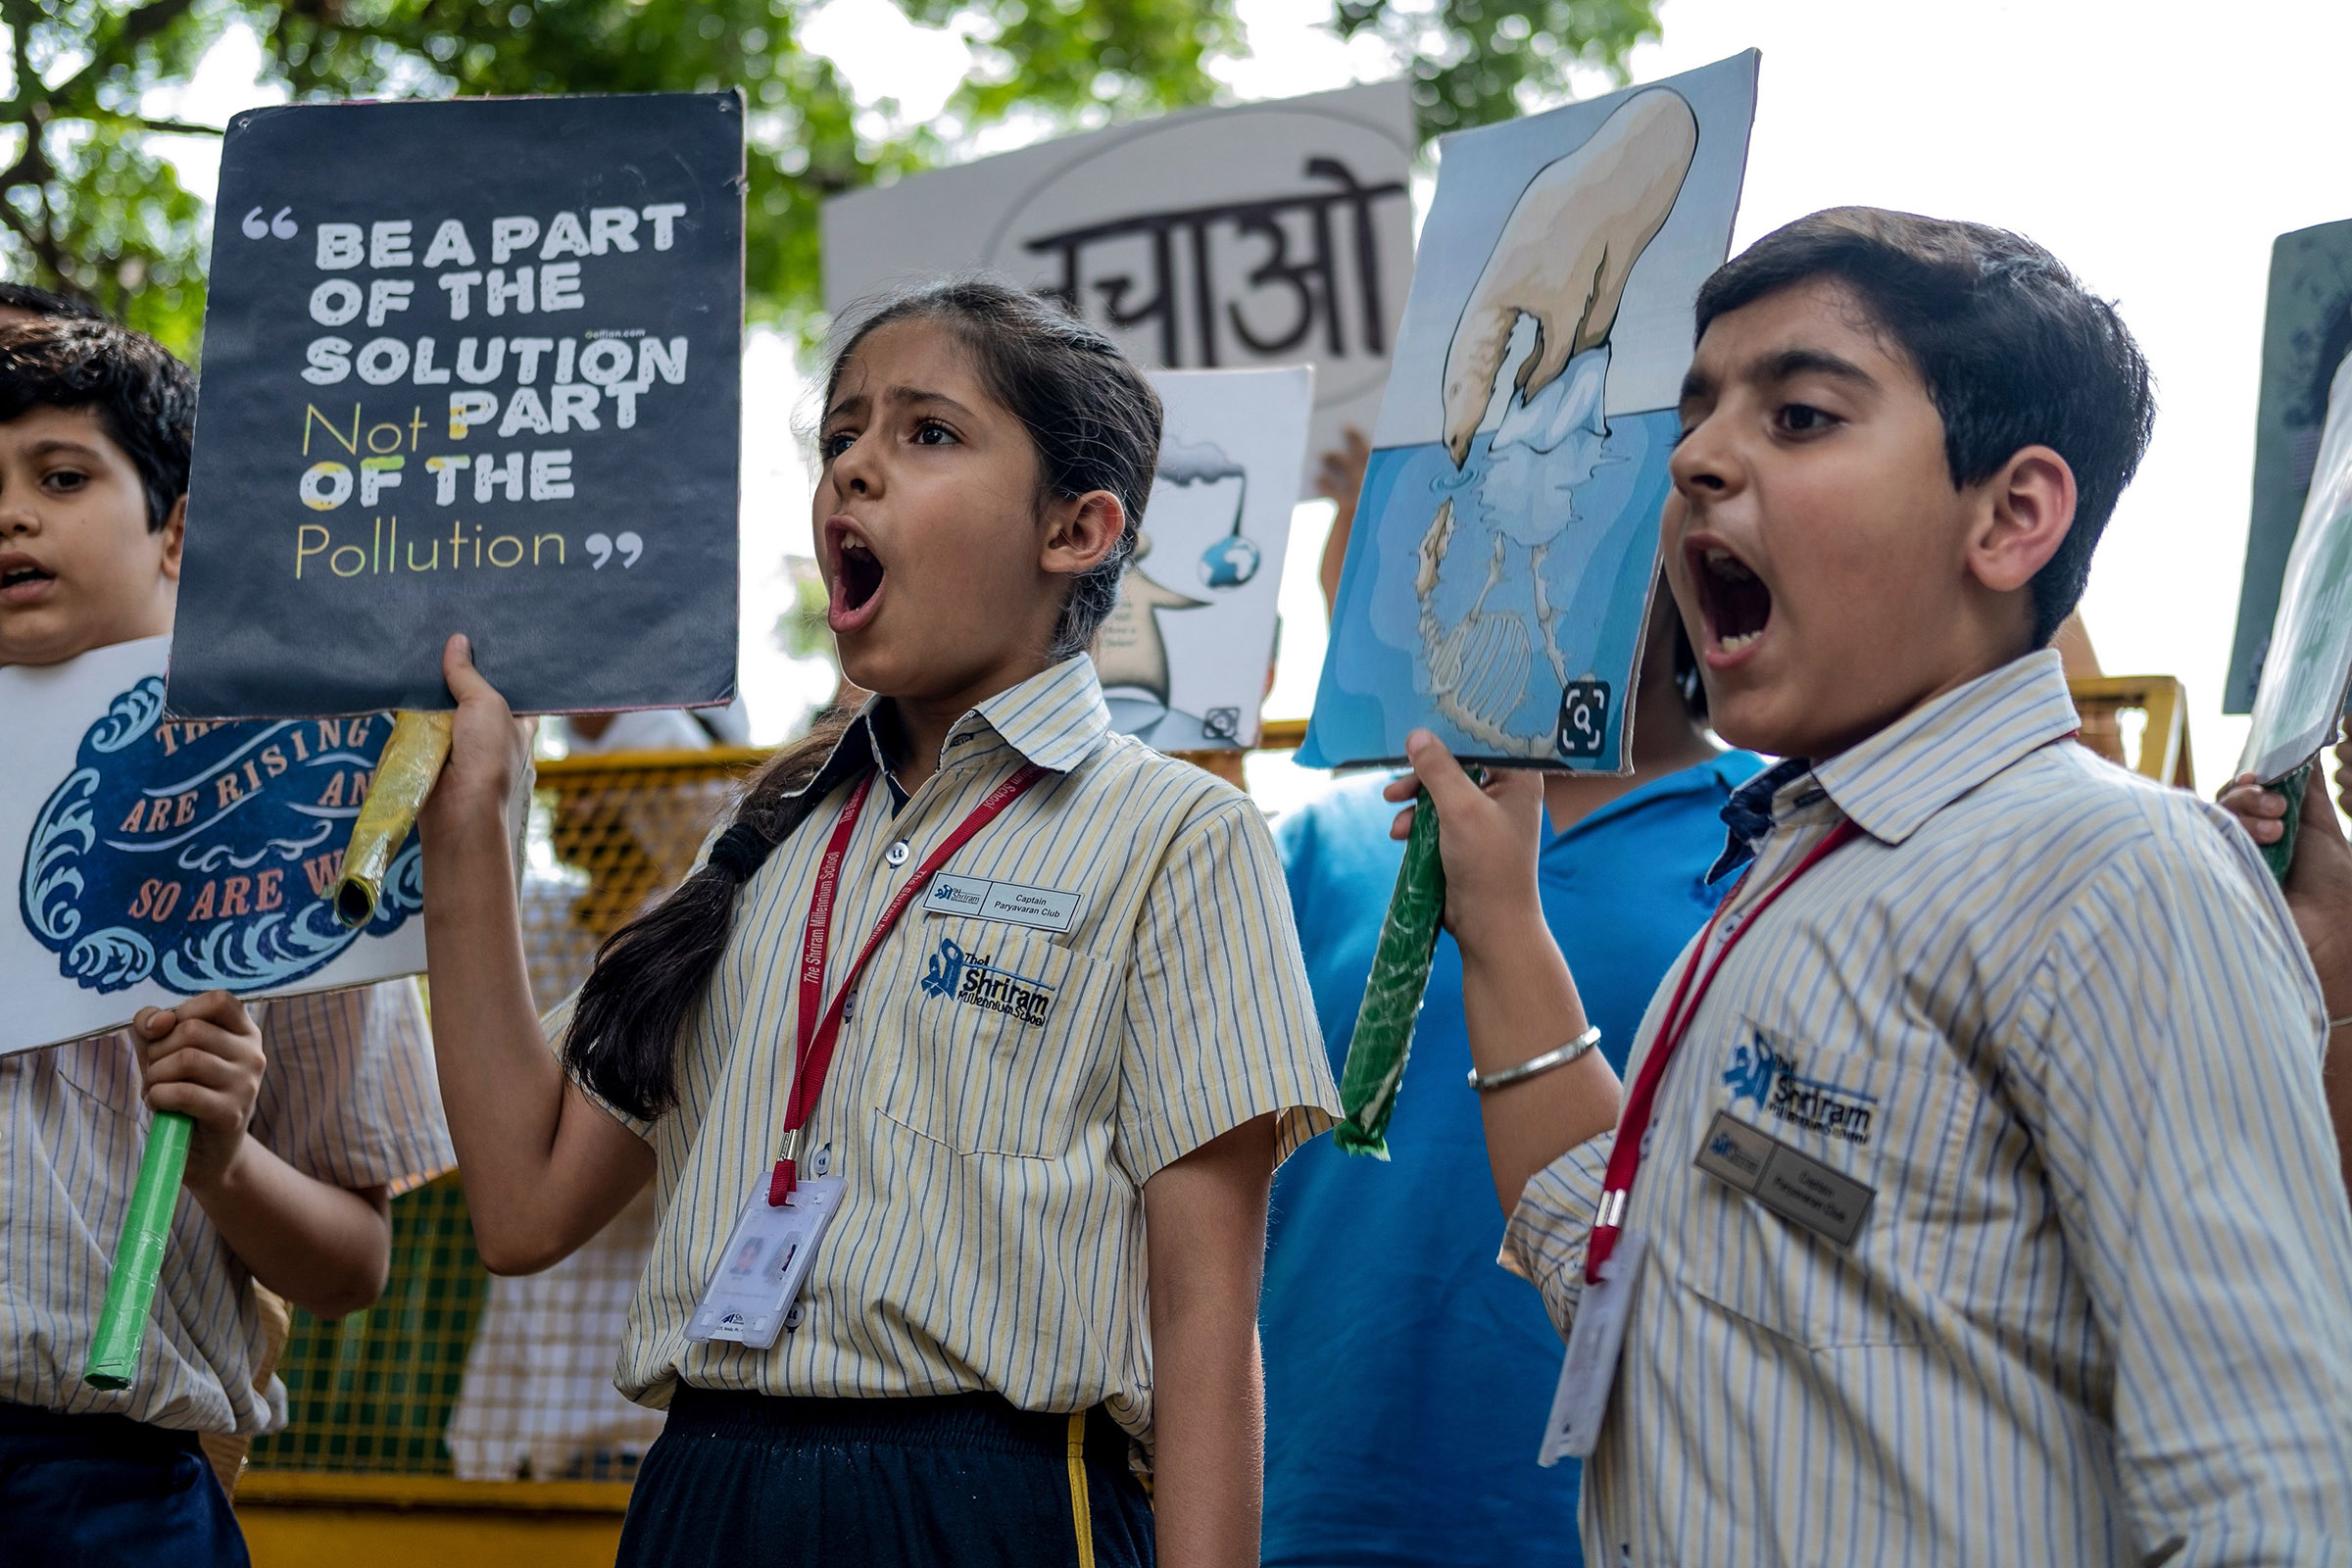 School children shout slogans as they participate in a climate strike to protest against governmental inaction towards climate breakdown and environmental pollution, part of demonstrations being held worldwide in a movement dubbed "Fridays for Future", in New Delhi on September 20, 2019. (Laurene Becquart—AFP/Getty Images)